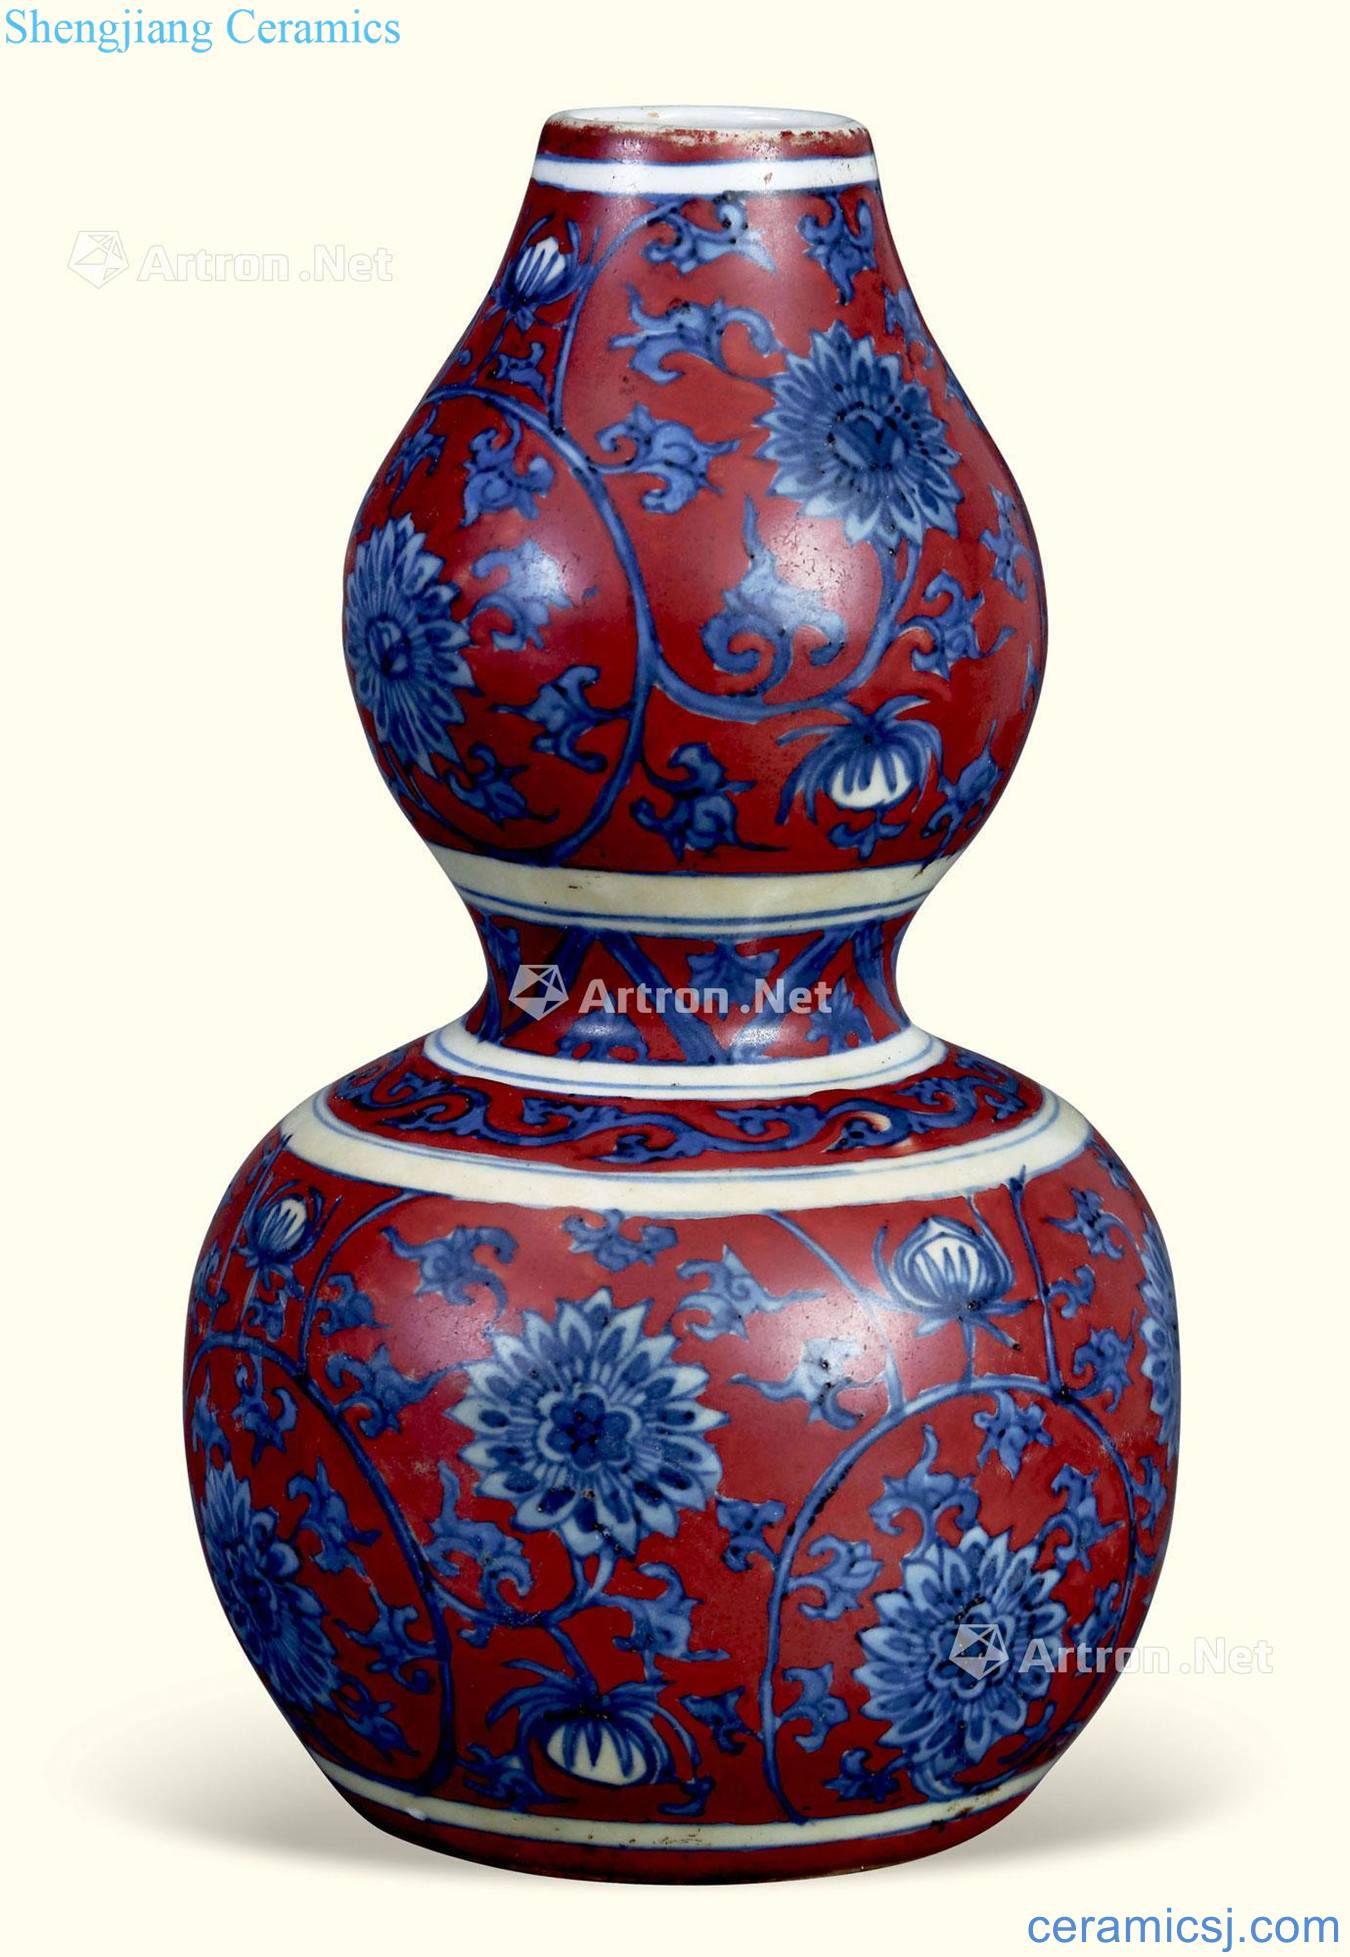 The red to blue and white gourd bottle